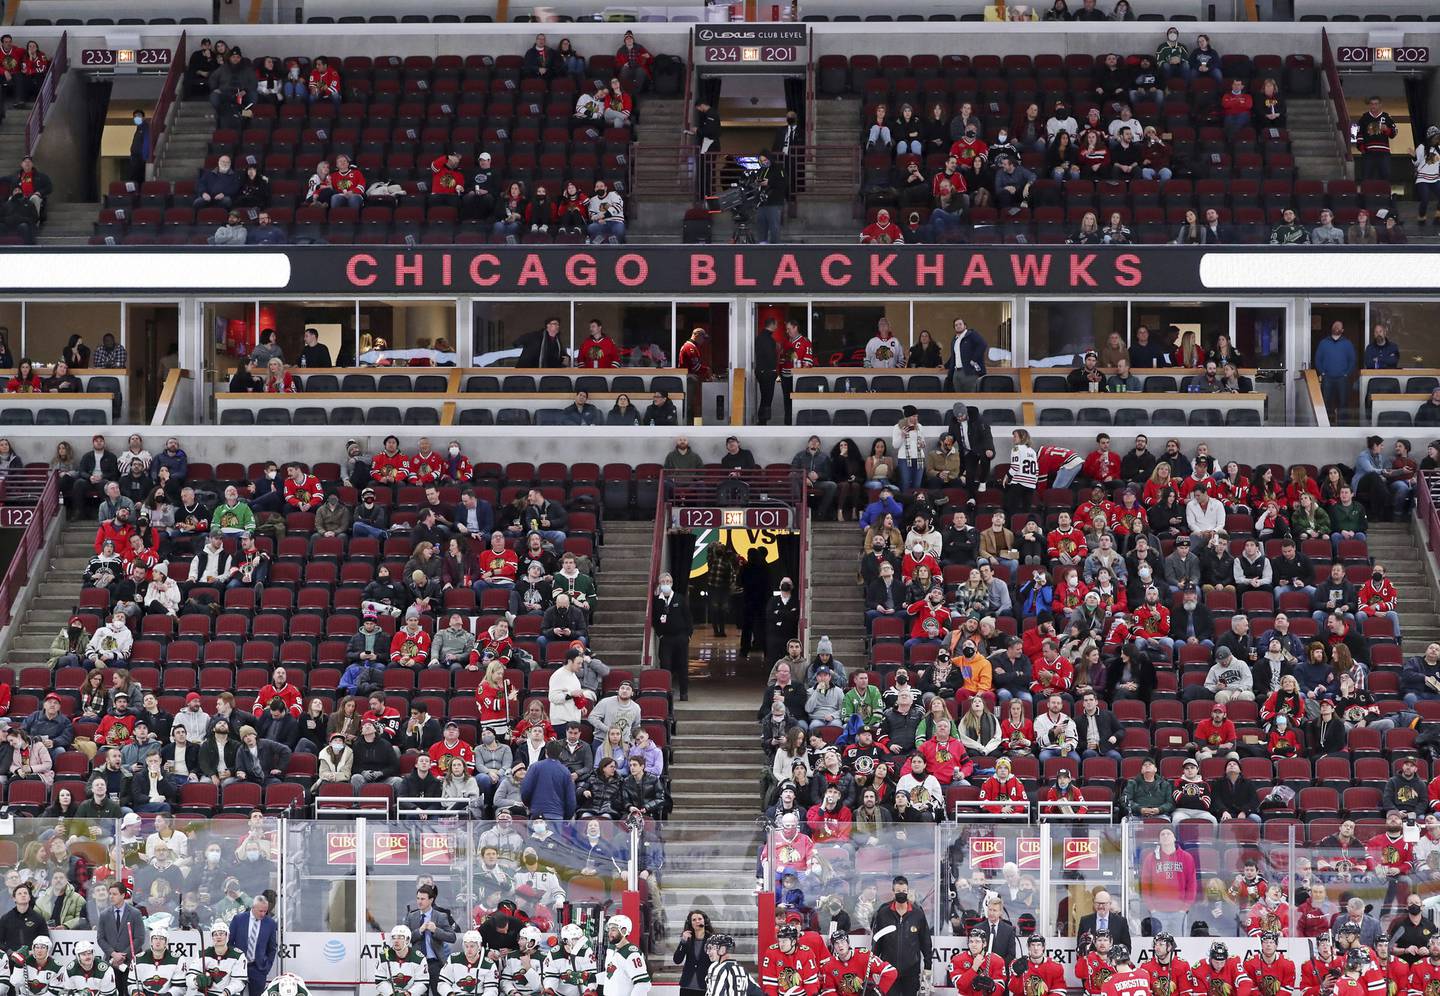 Chicago Blackhawks fans watch a game against the Minnesota Wild at the United Center, Feb. 2, 2022.